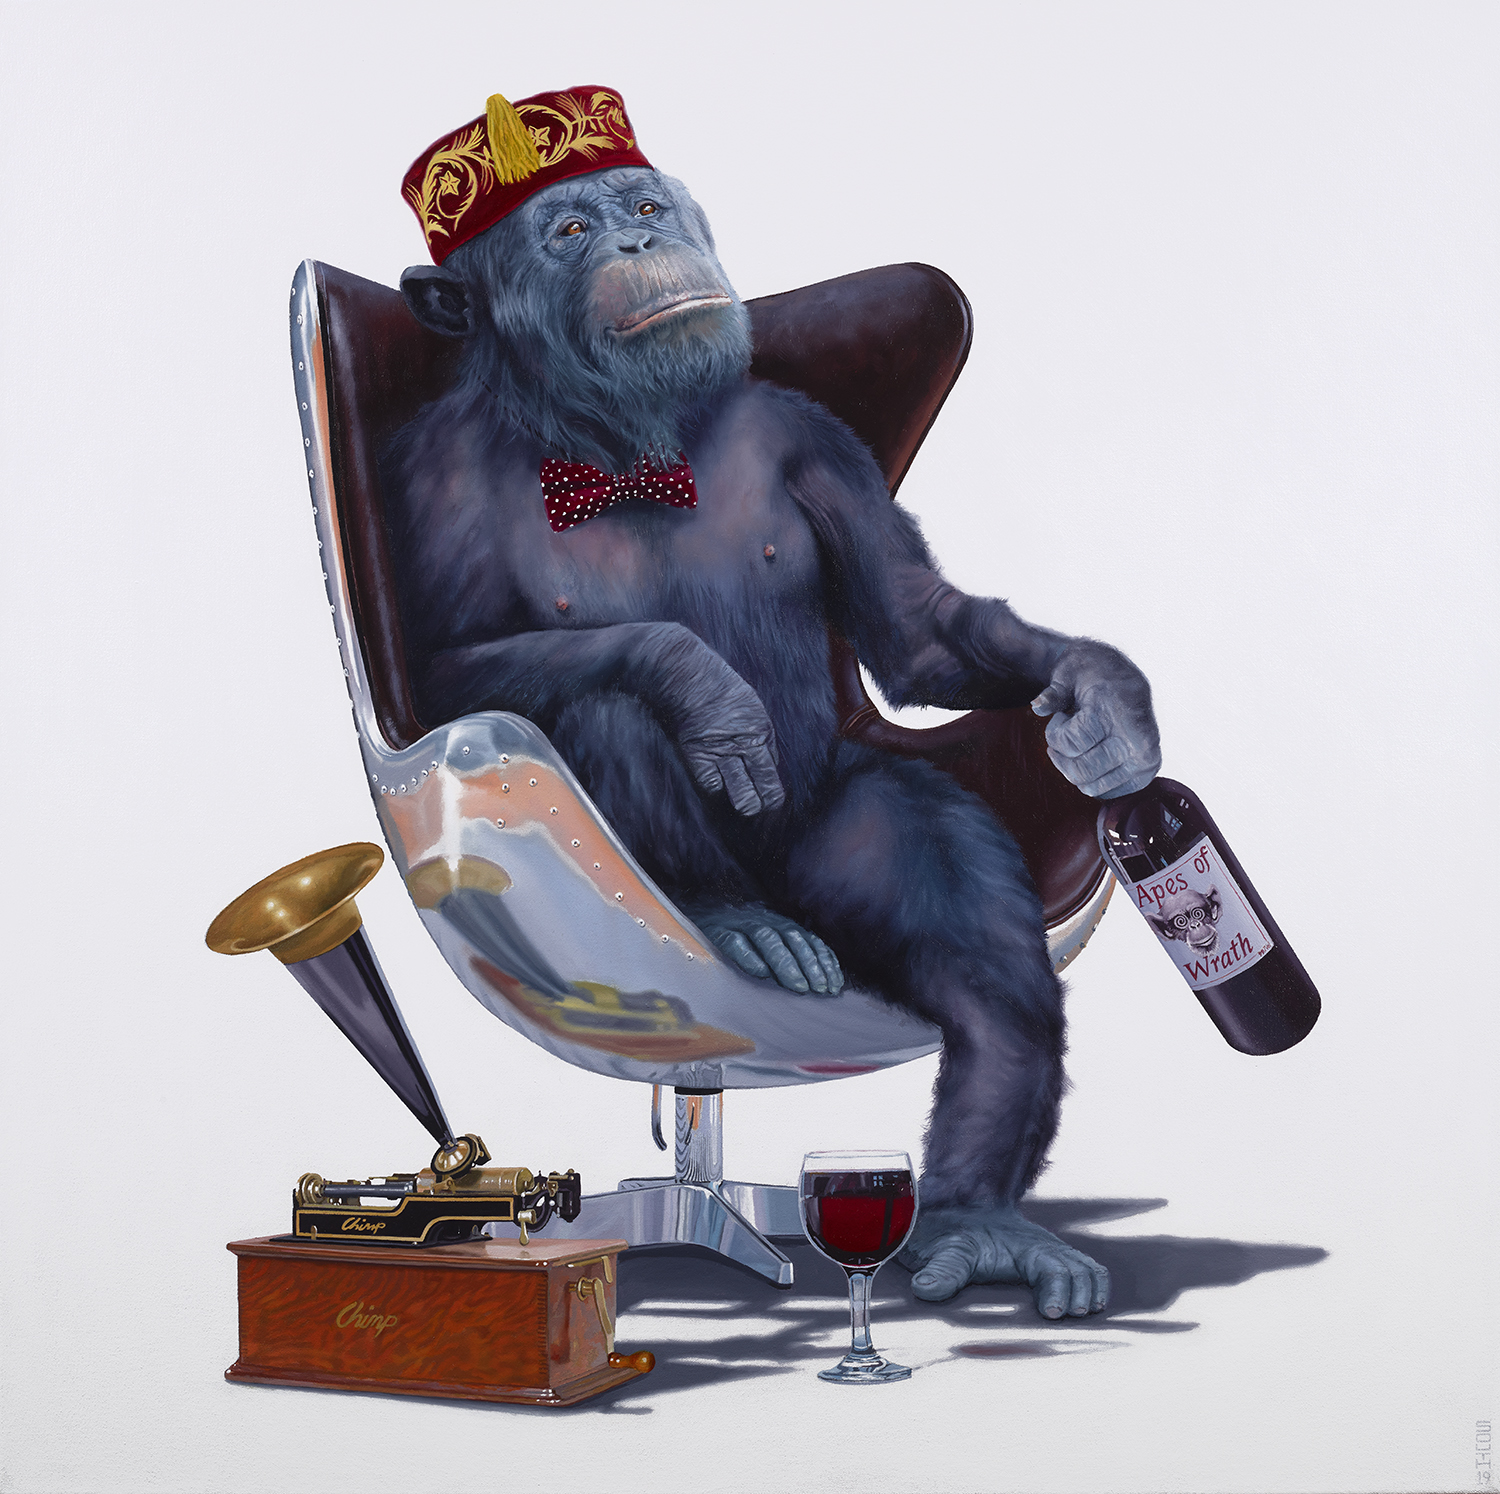 A monkey in a chair holding a bottle of wine and a Victrola next to him - Tony South - Phono